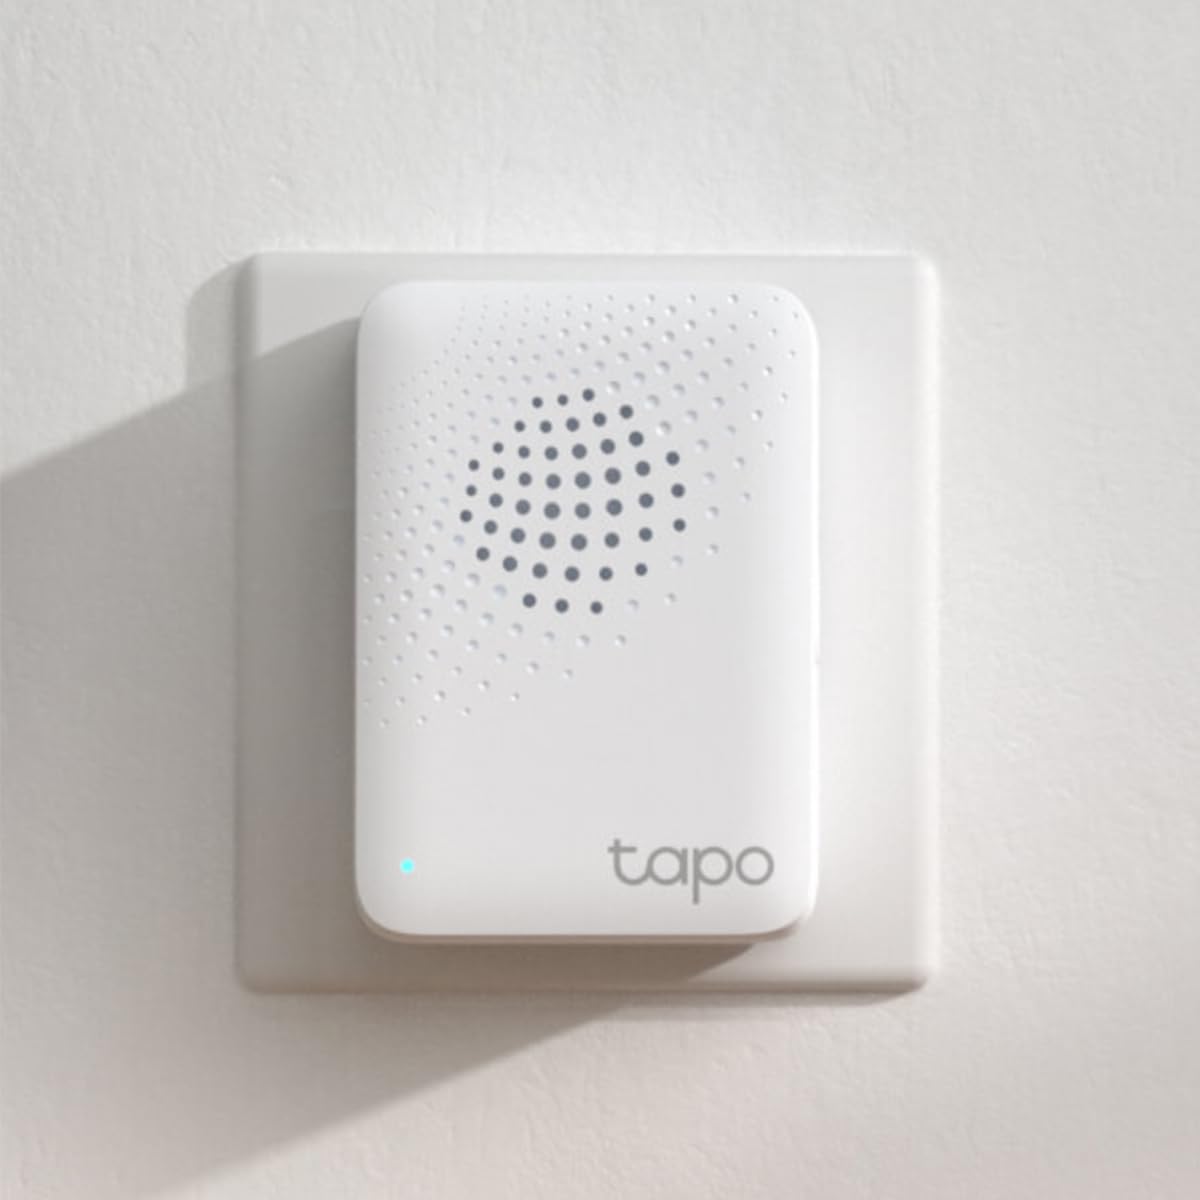 TP-Link Tapo Smart Hub with Built-in Chime, REQUIRES 2.4GHz Wi-Fi, Reliable Long-Range Connections with Tapo Sensors, Sub-1G Low-Power Wireless protocol, Connect with up to 64 smart devices. Tapo H100